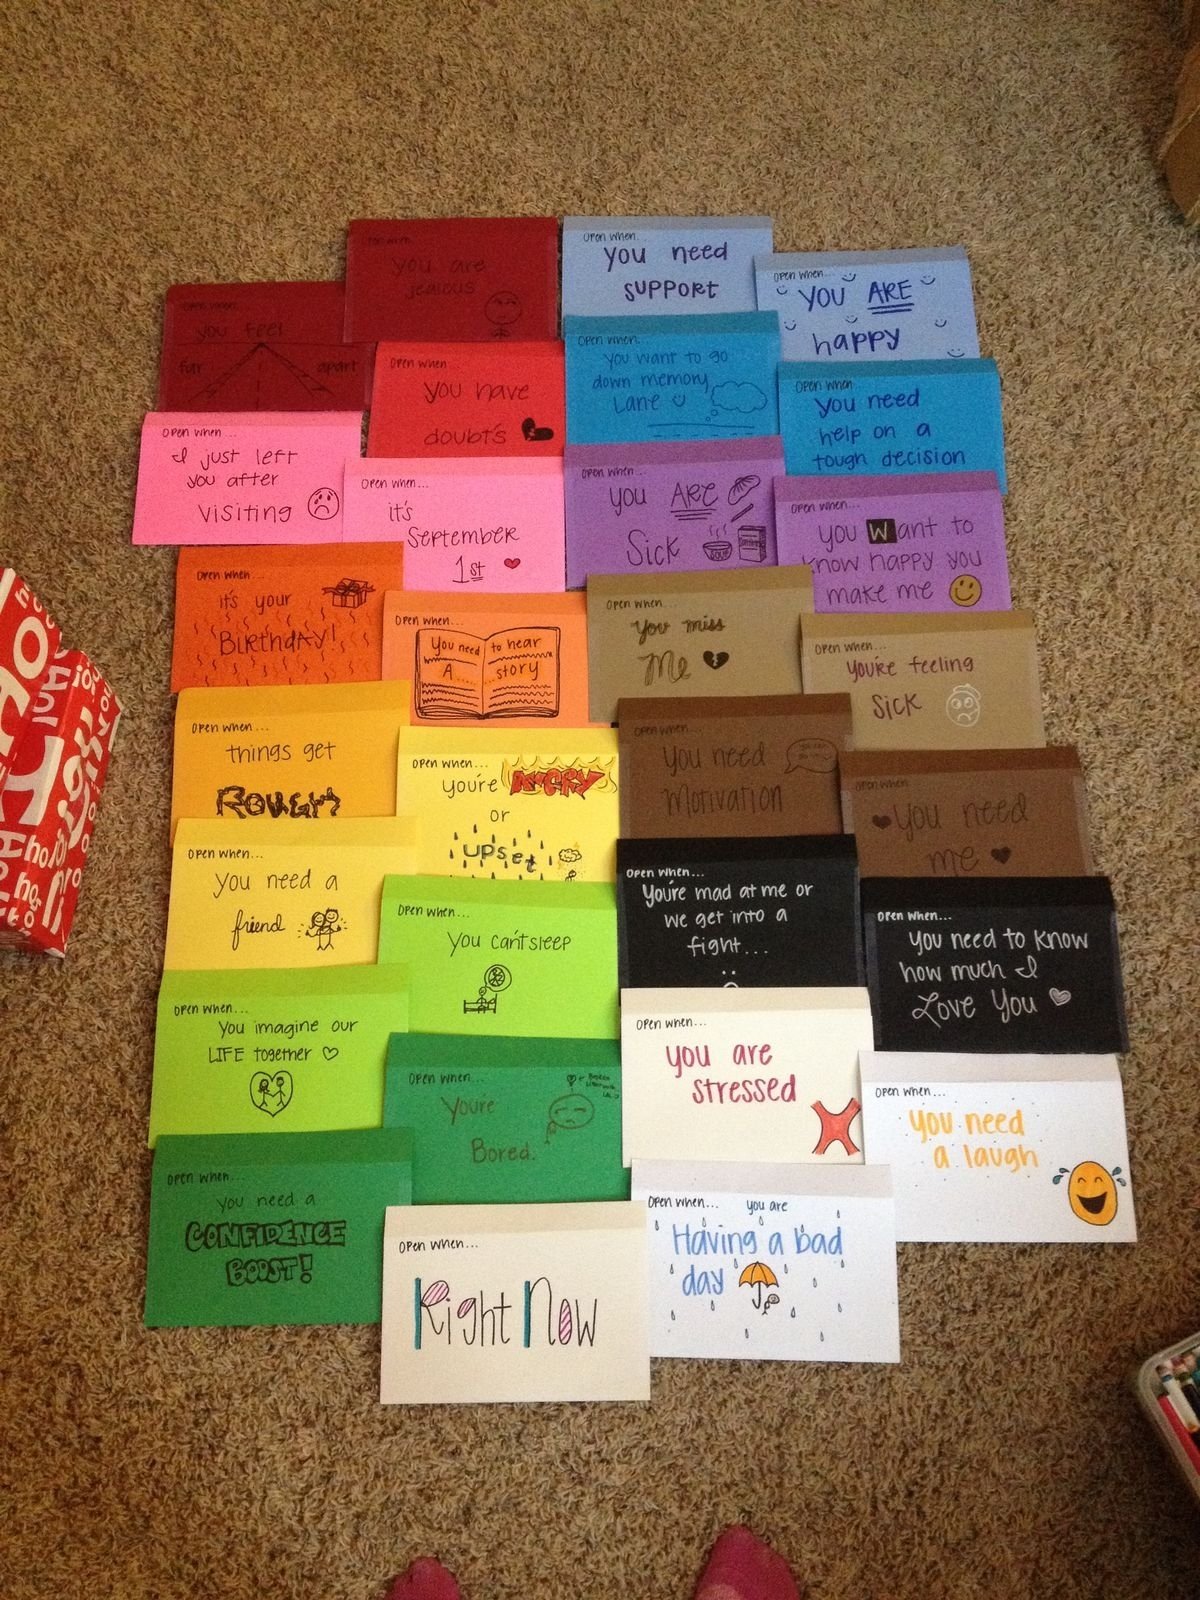 10 Ideal Cute Ideas For Boyfriend Birthday 35 inspiring open when letters madeyou gift relationships and 4 2022